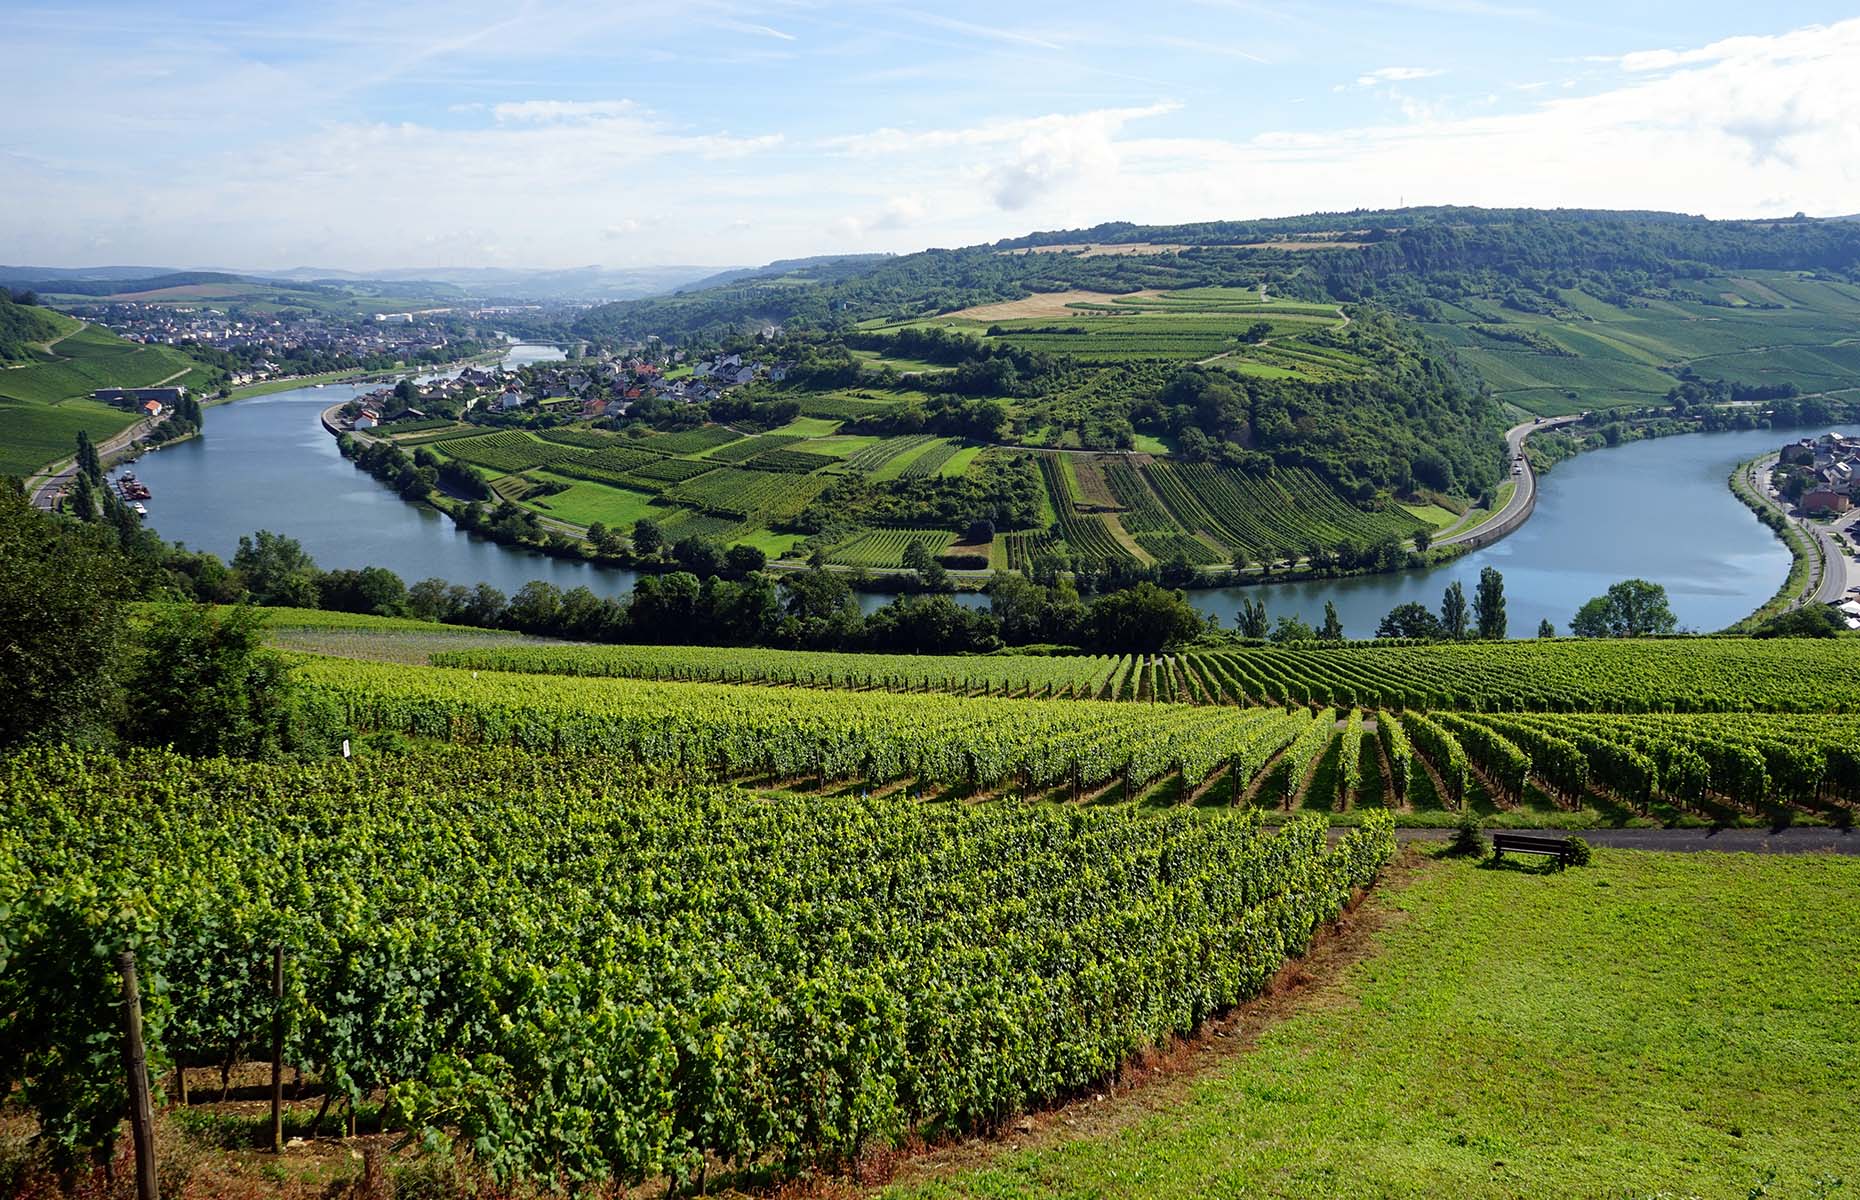 Moselle vineyards in Luxembourg (Image: Valery Shanin/Shutterstock)